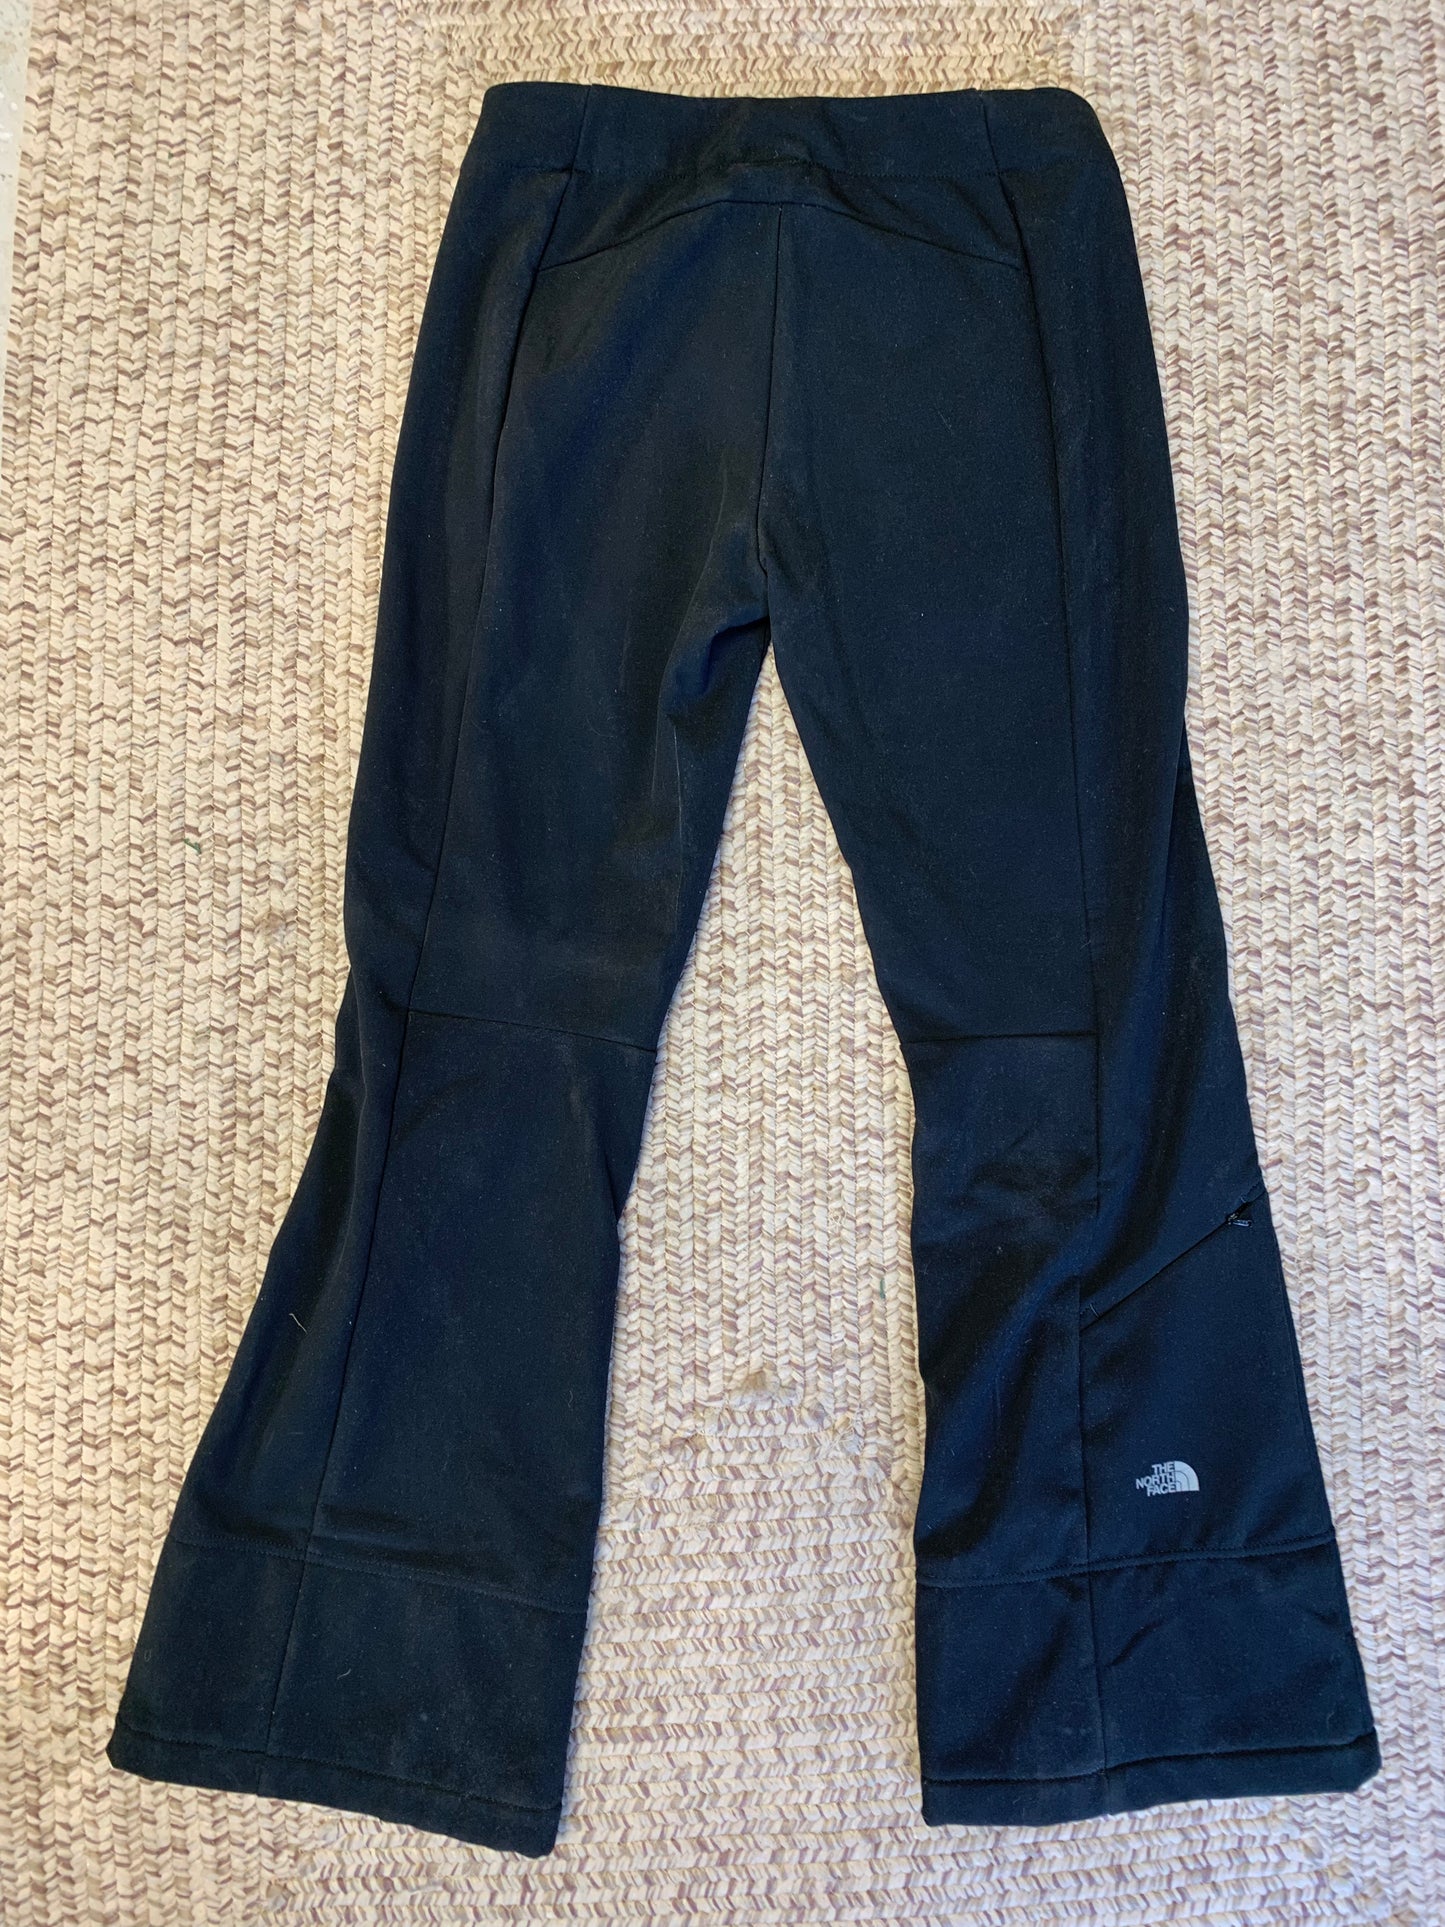 North Face Women's Black Insulated Pants Size: M/M